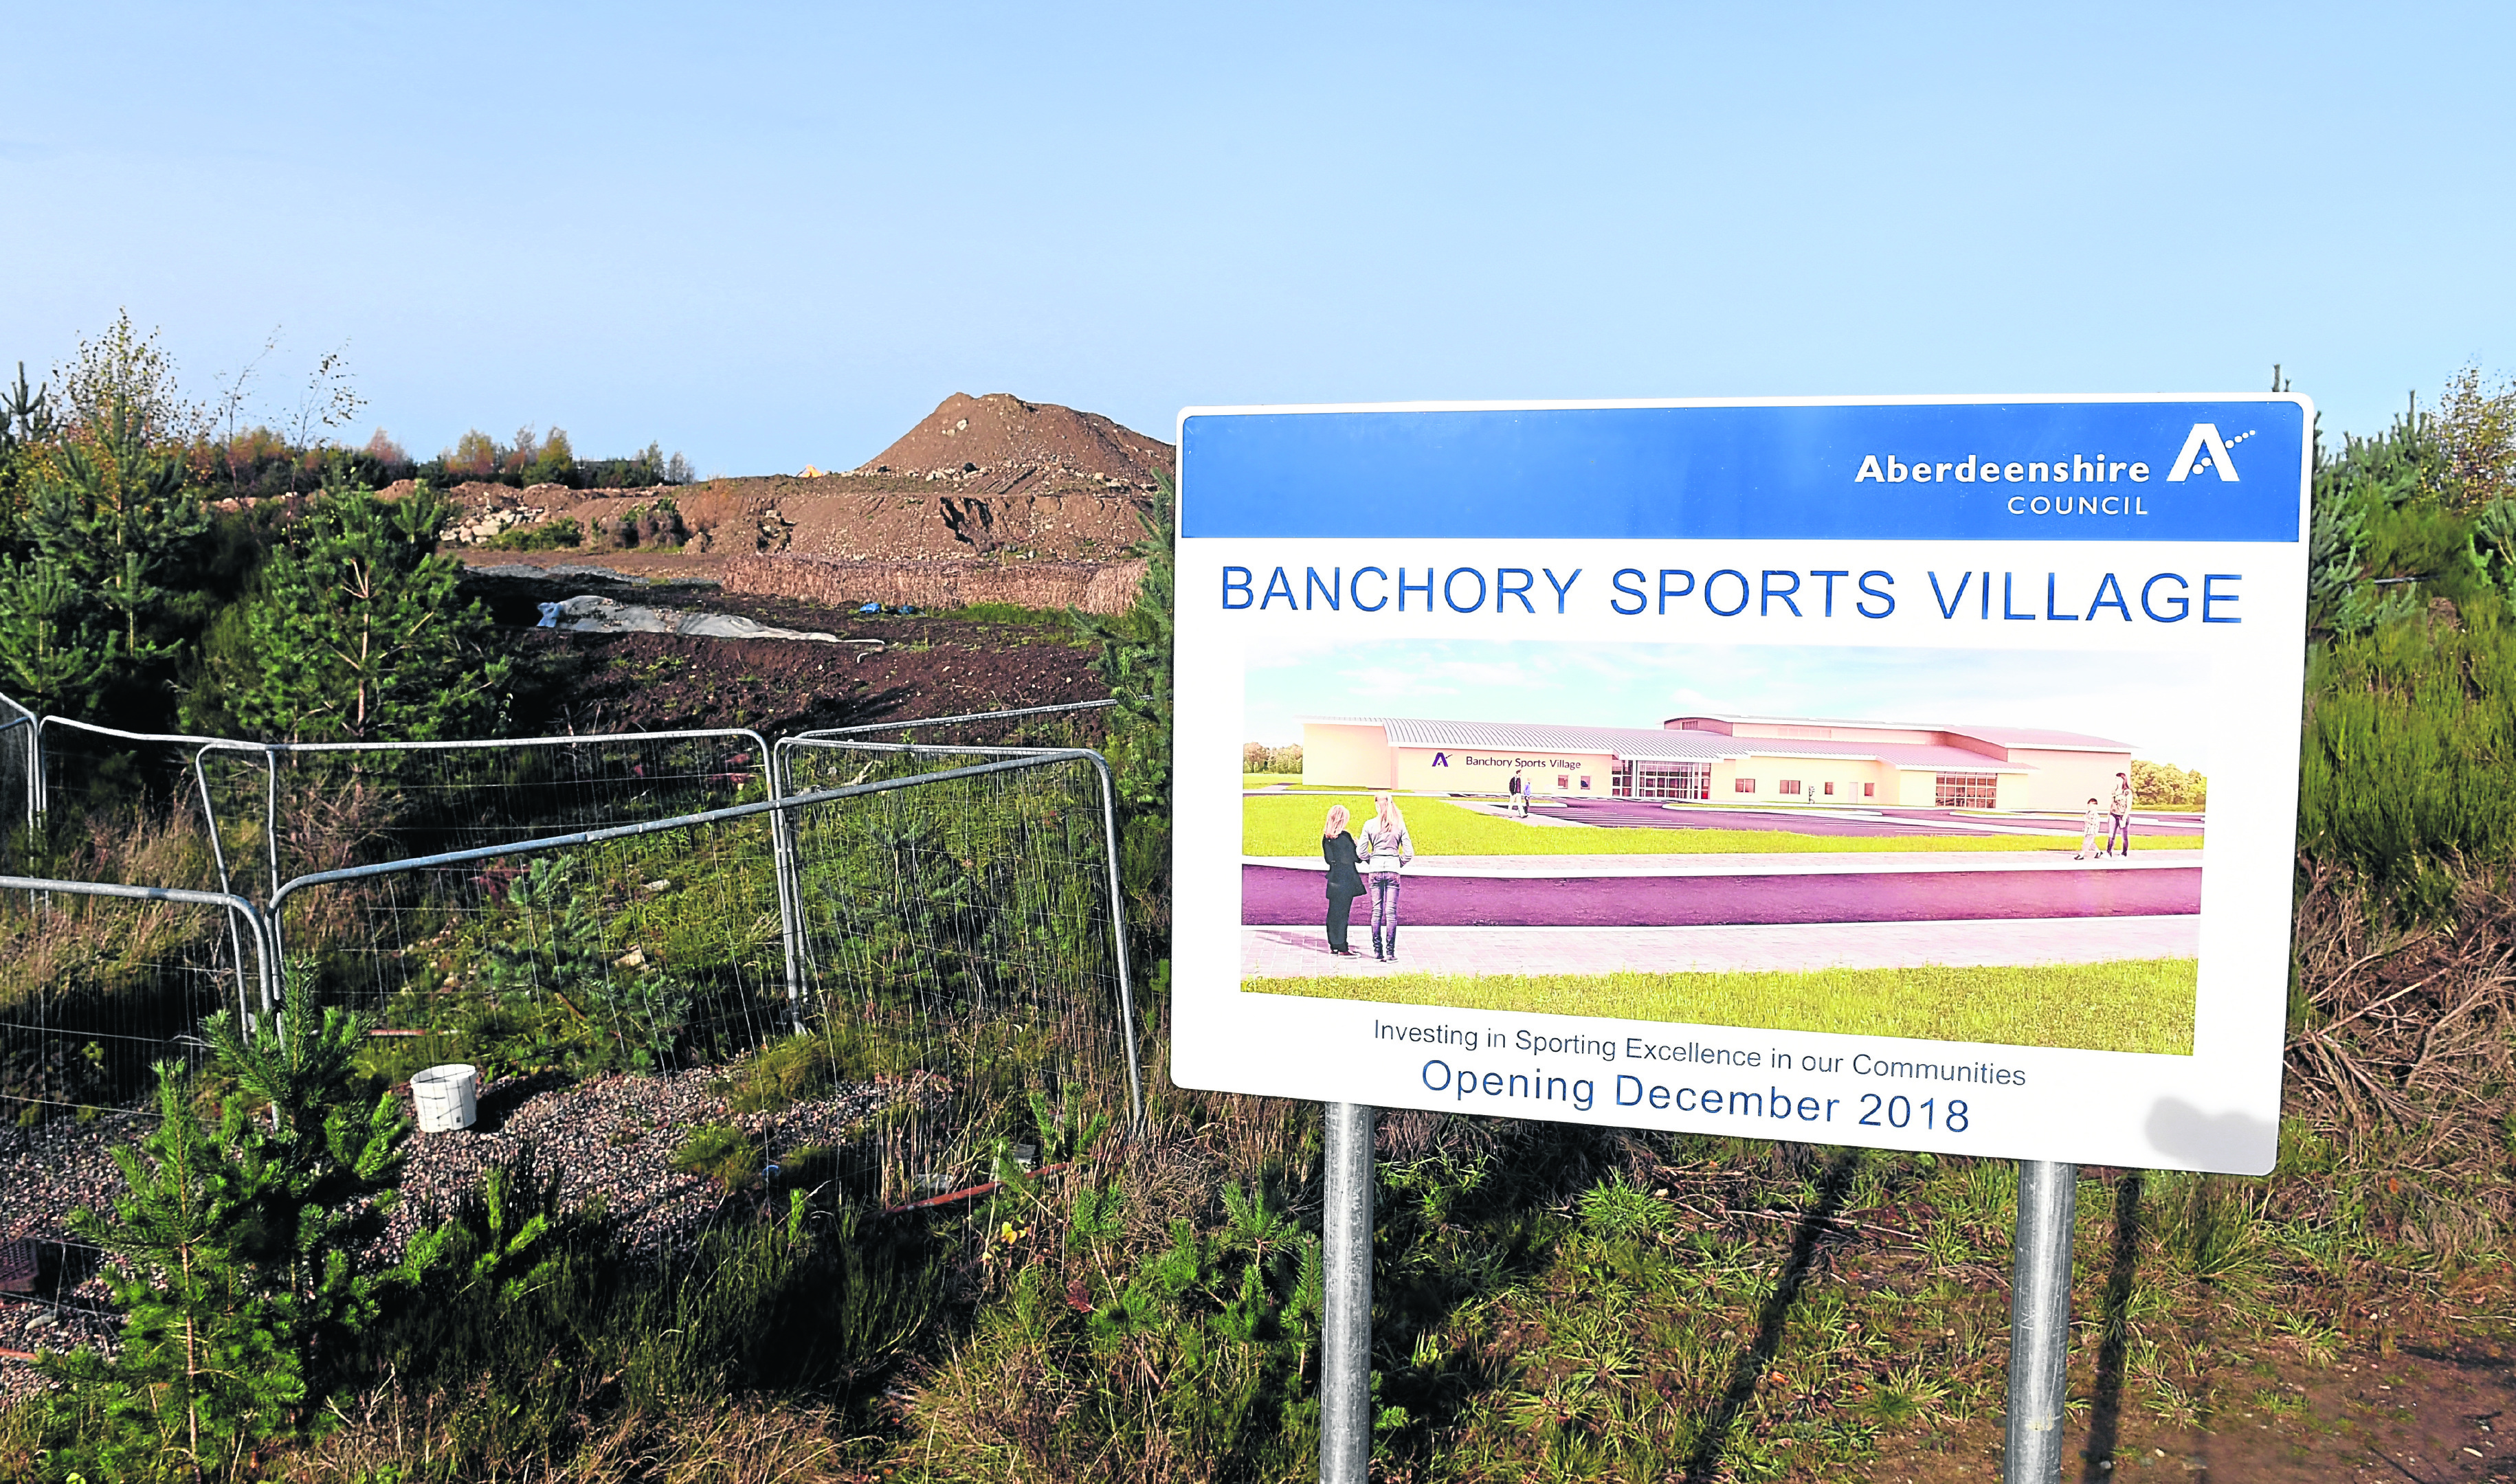 Locator of the Banchory Sports Village site.